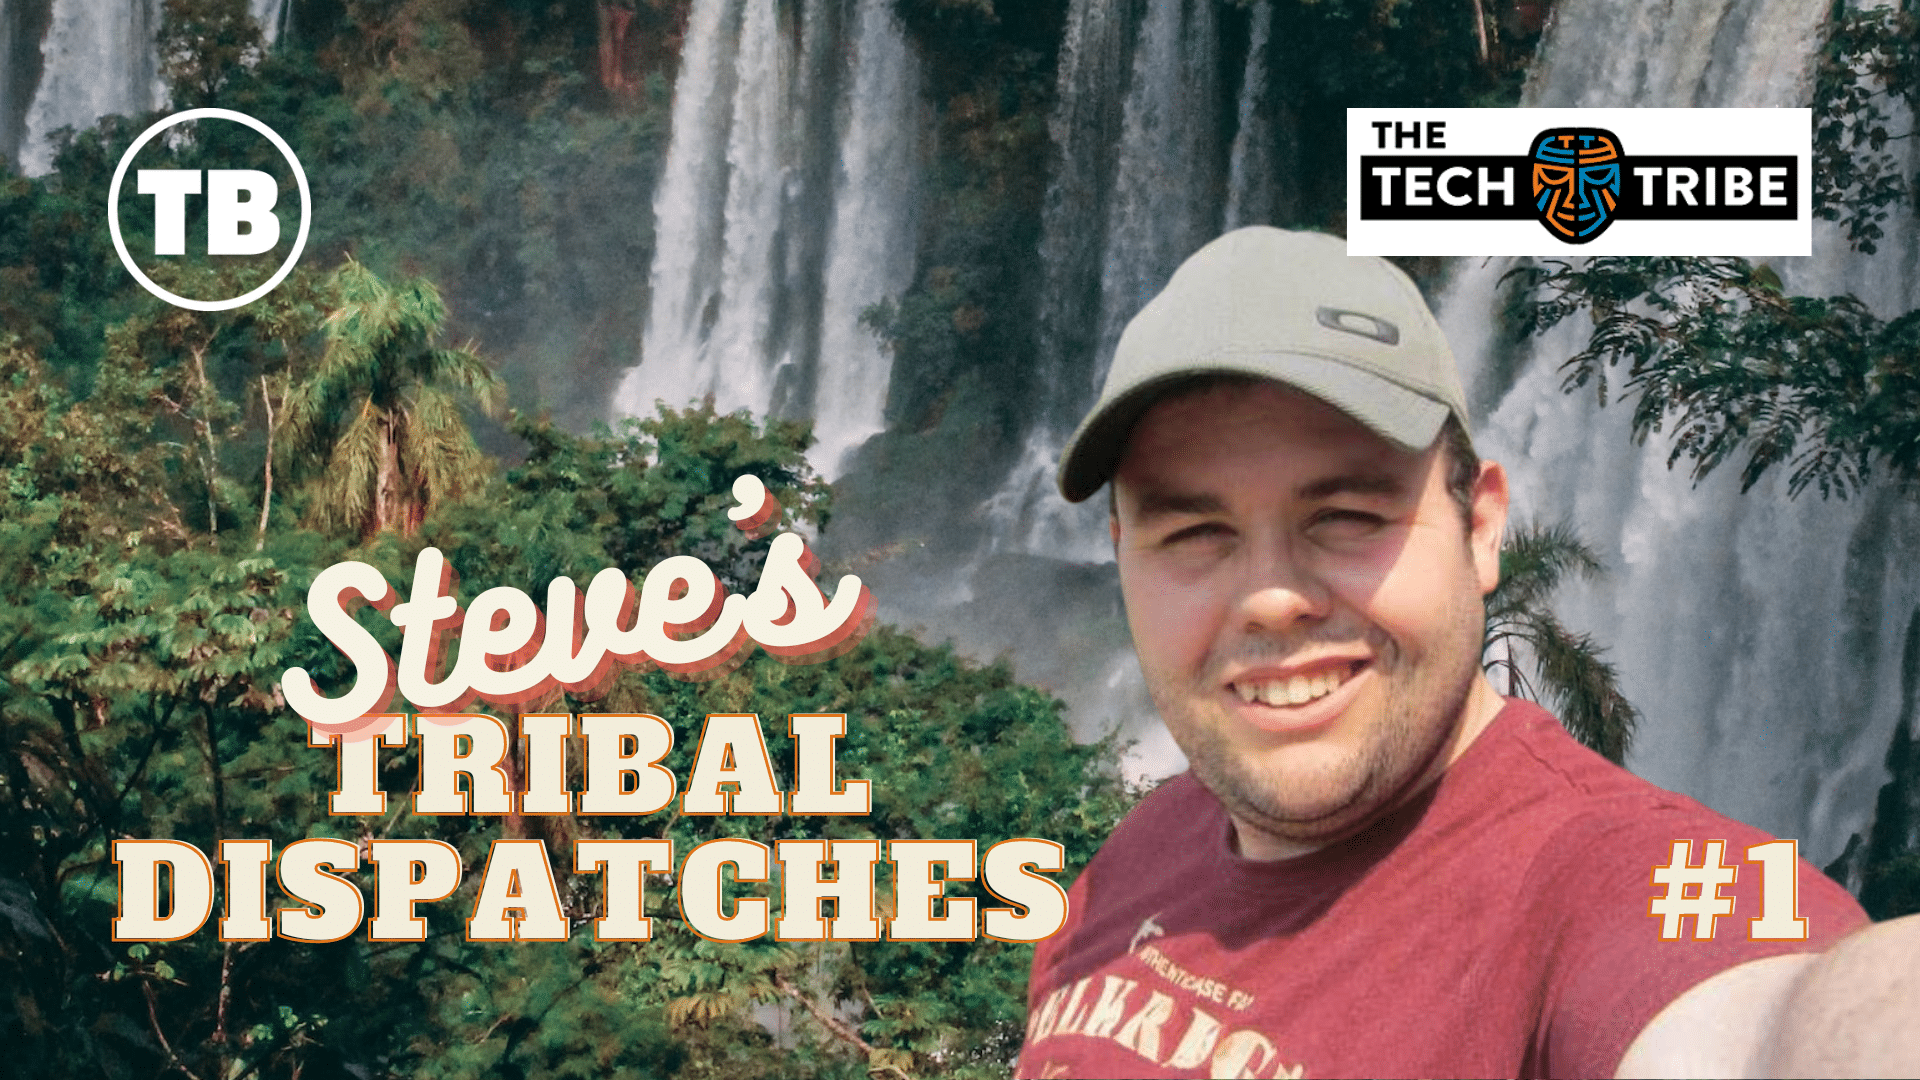 Steve’s Tribal Dispatches #1 – Benefits of Being a Tech Tribe Member image